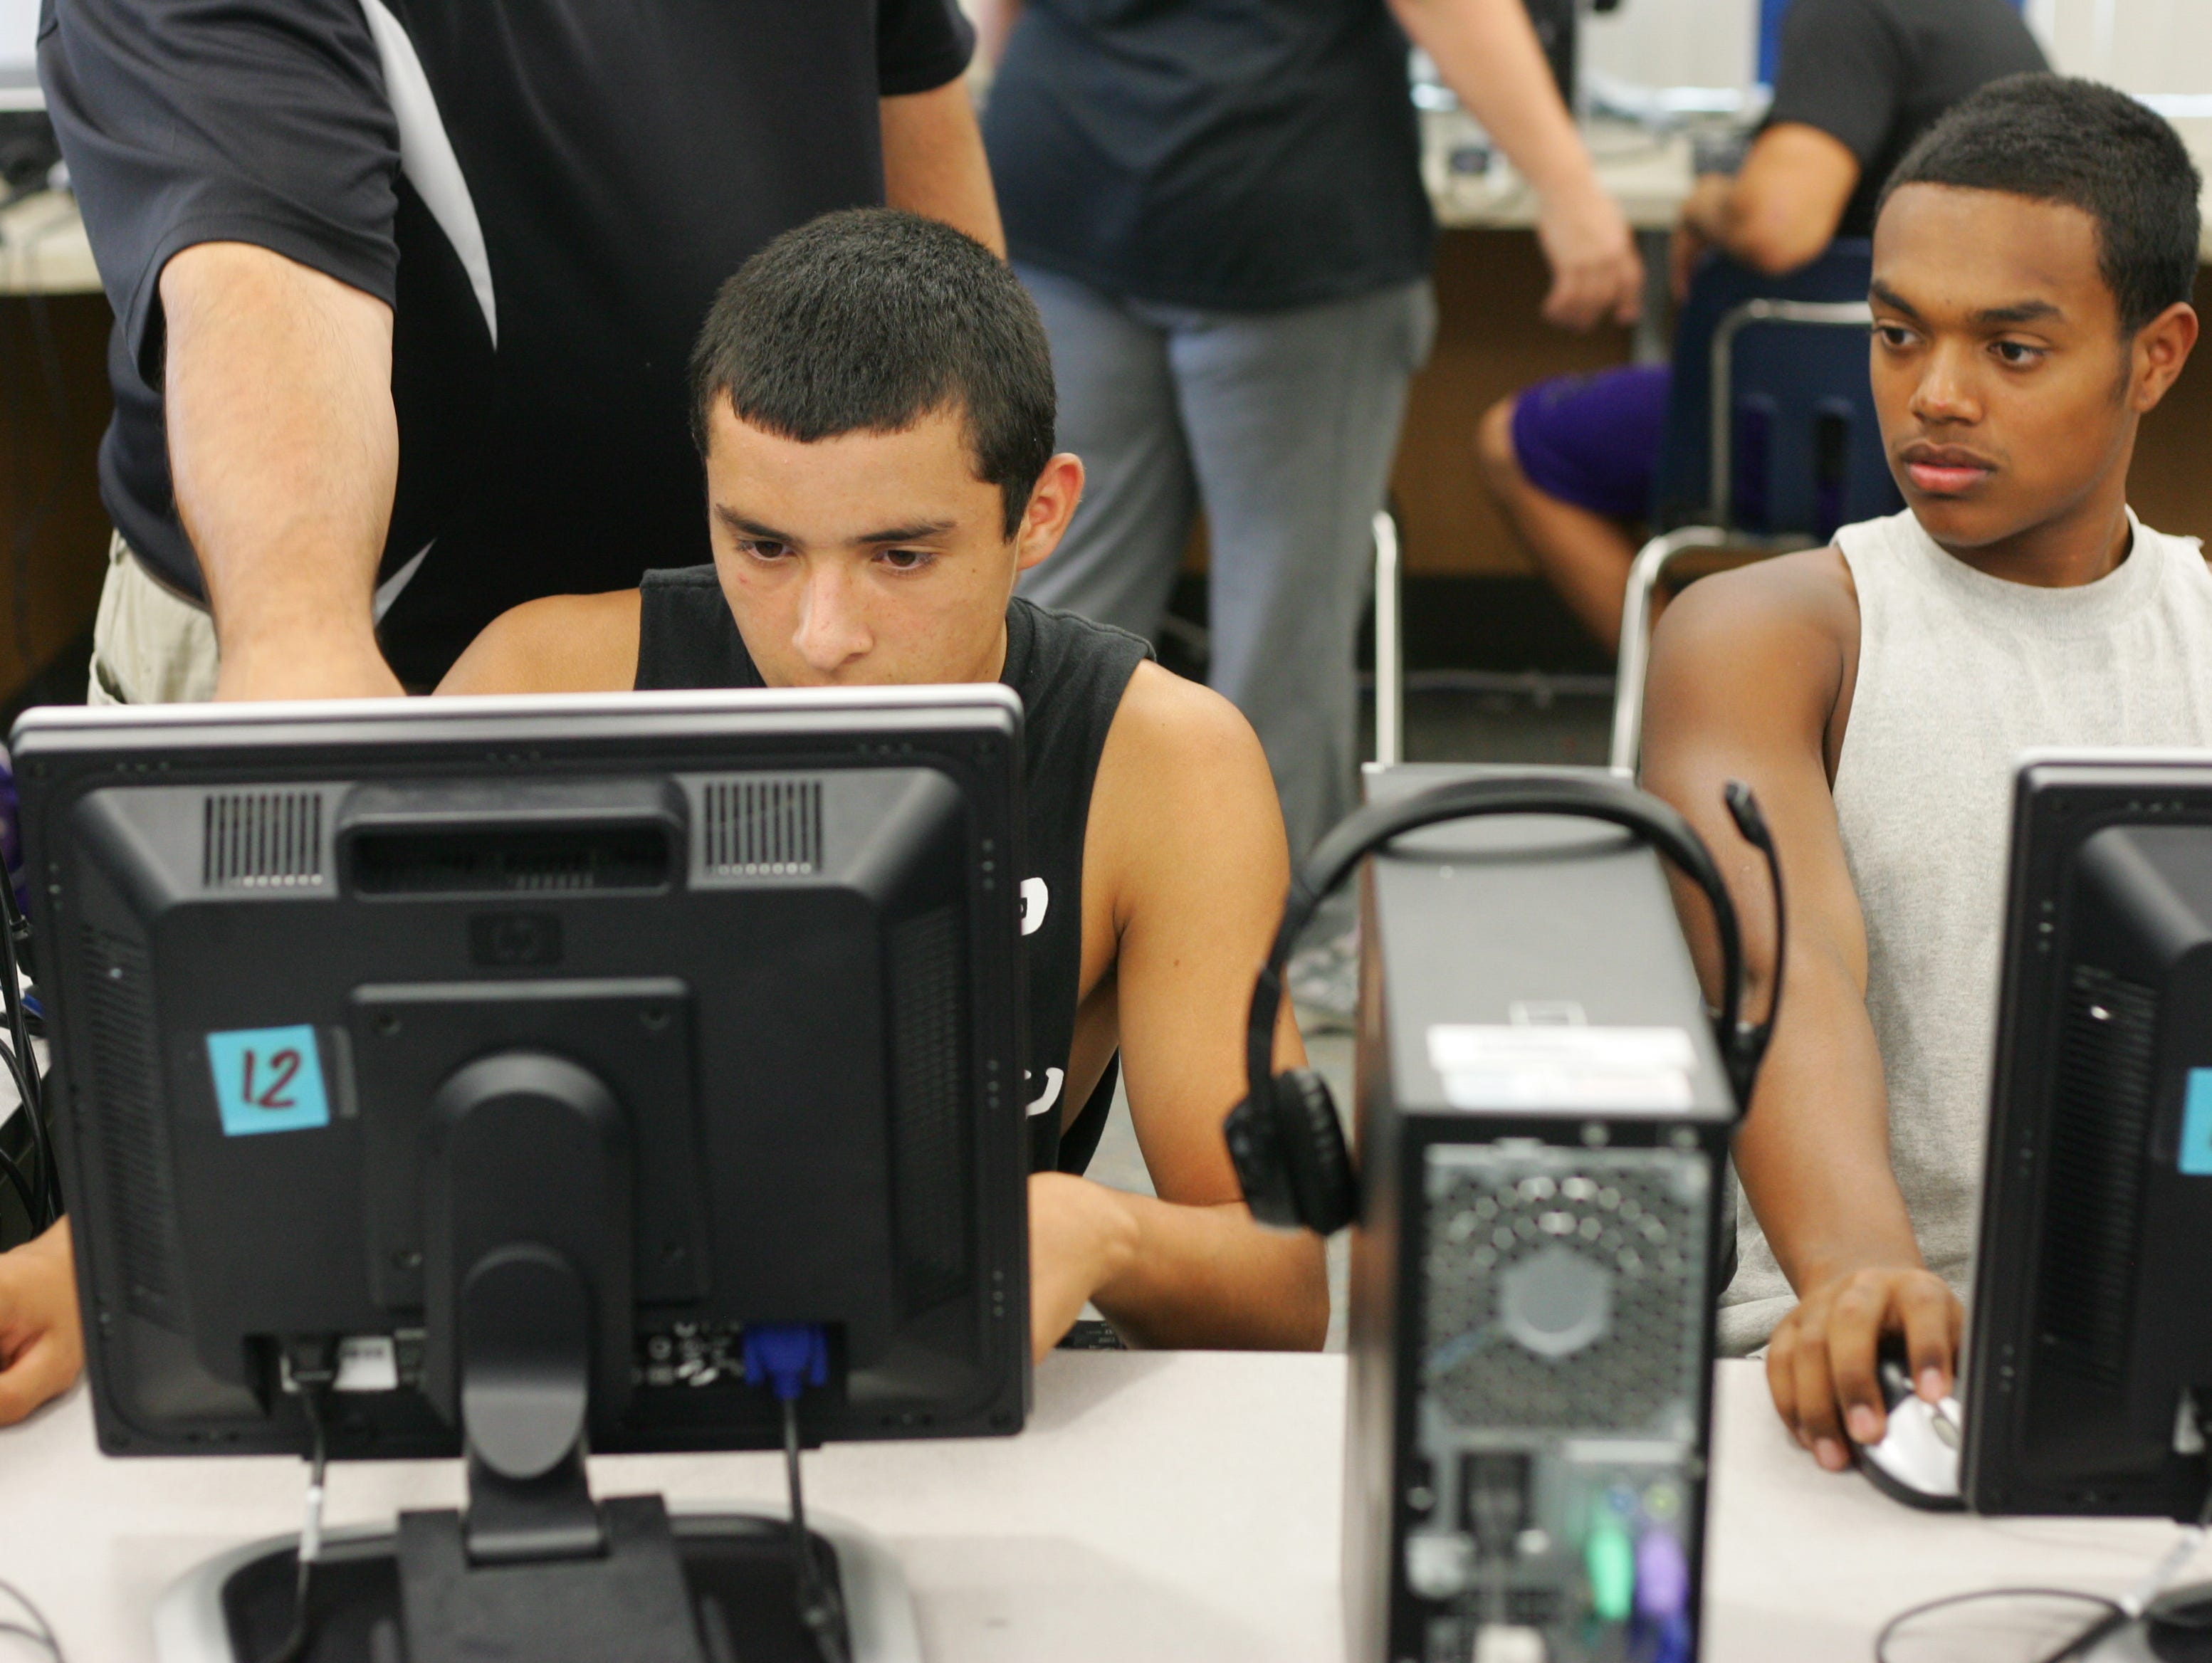 In this 2012 file photo, members of the Shadow Hills High School varsity football team prepare to take an ImPACT test, a computer based test to set a baseline for the cognitive ability of the test taker. After a concussion the athlete can retake the test to see if his or her cognitive skills have suffered.